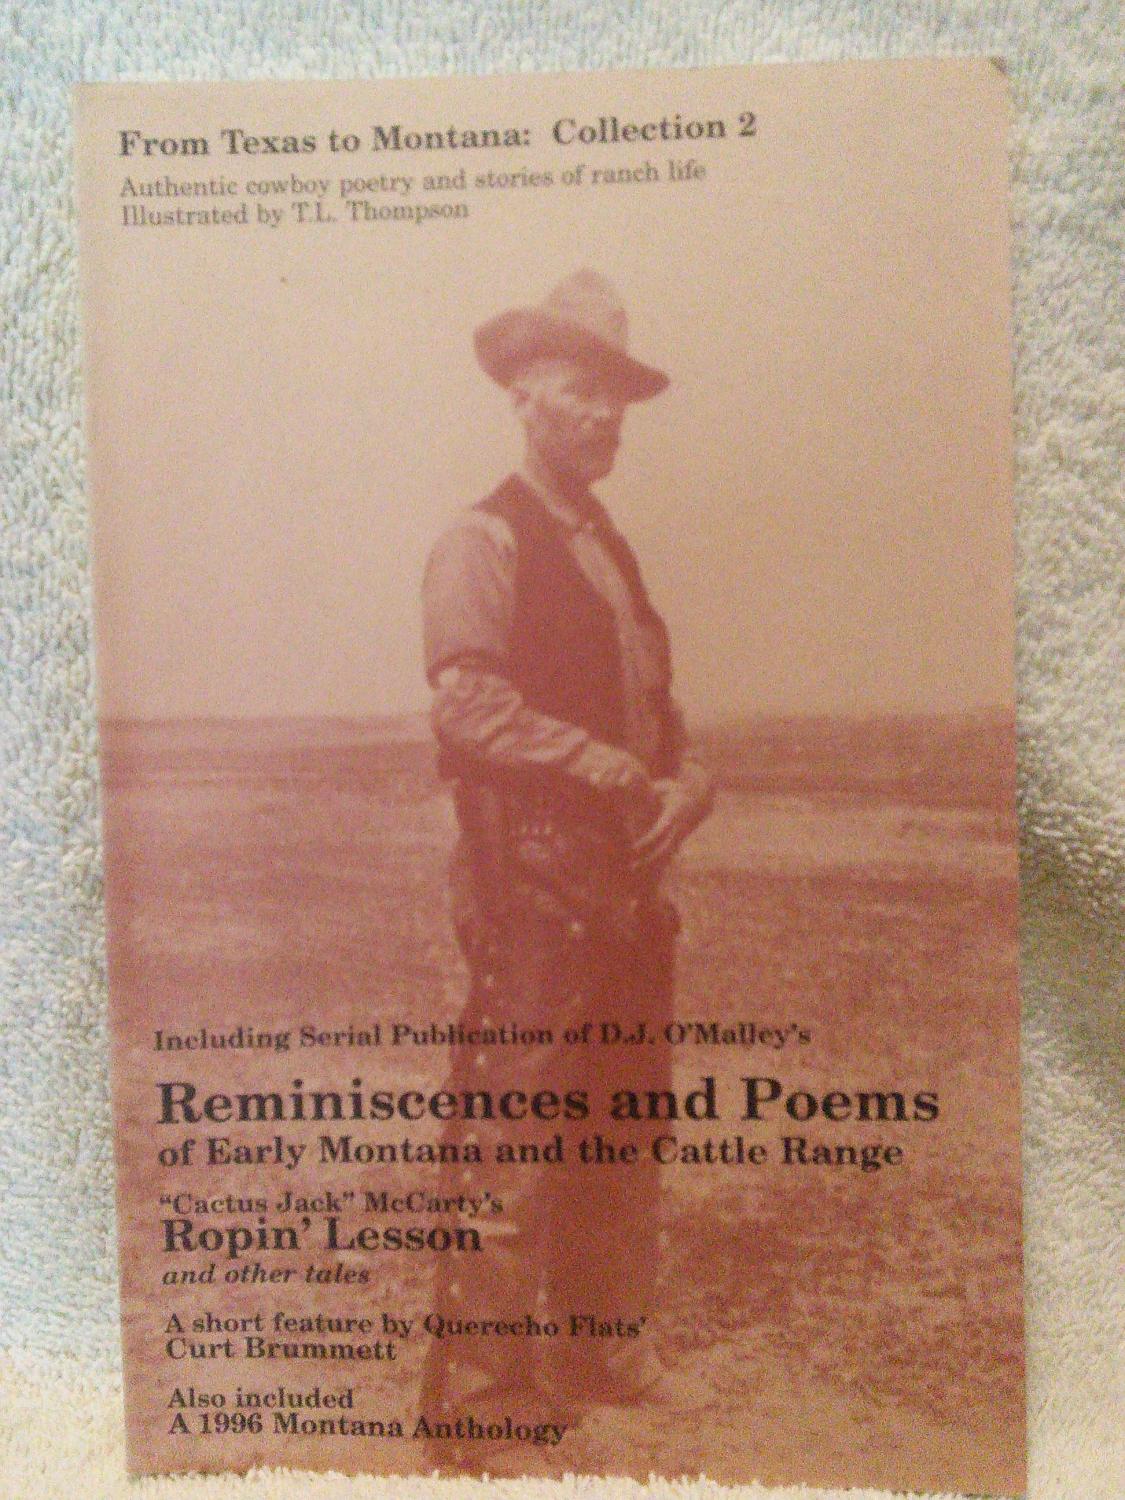 From Texas to Montana: Collection 2, Authentic Cowboy Poetry and Stories of Ranch  Life by Edited by Jeff Streeby: As New Soft cover (1996) 1st Edition